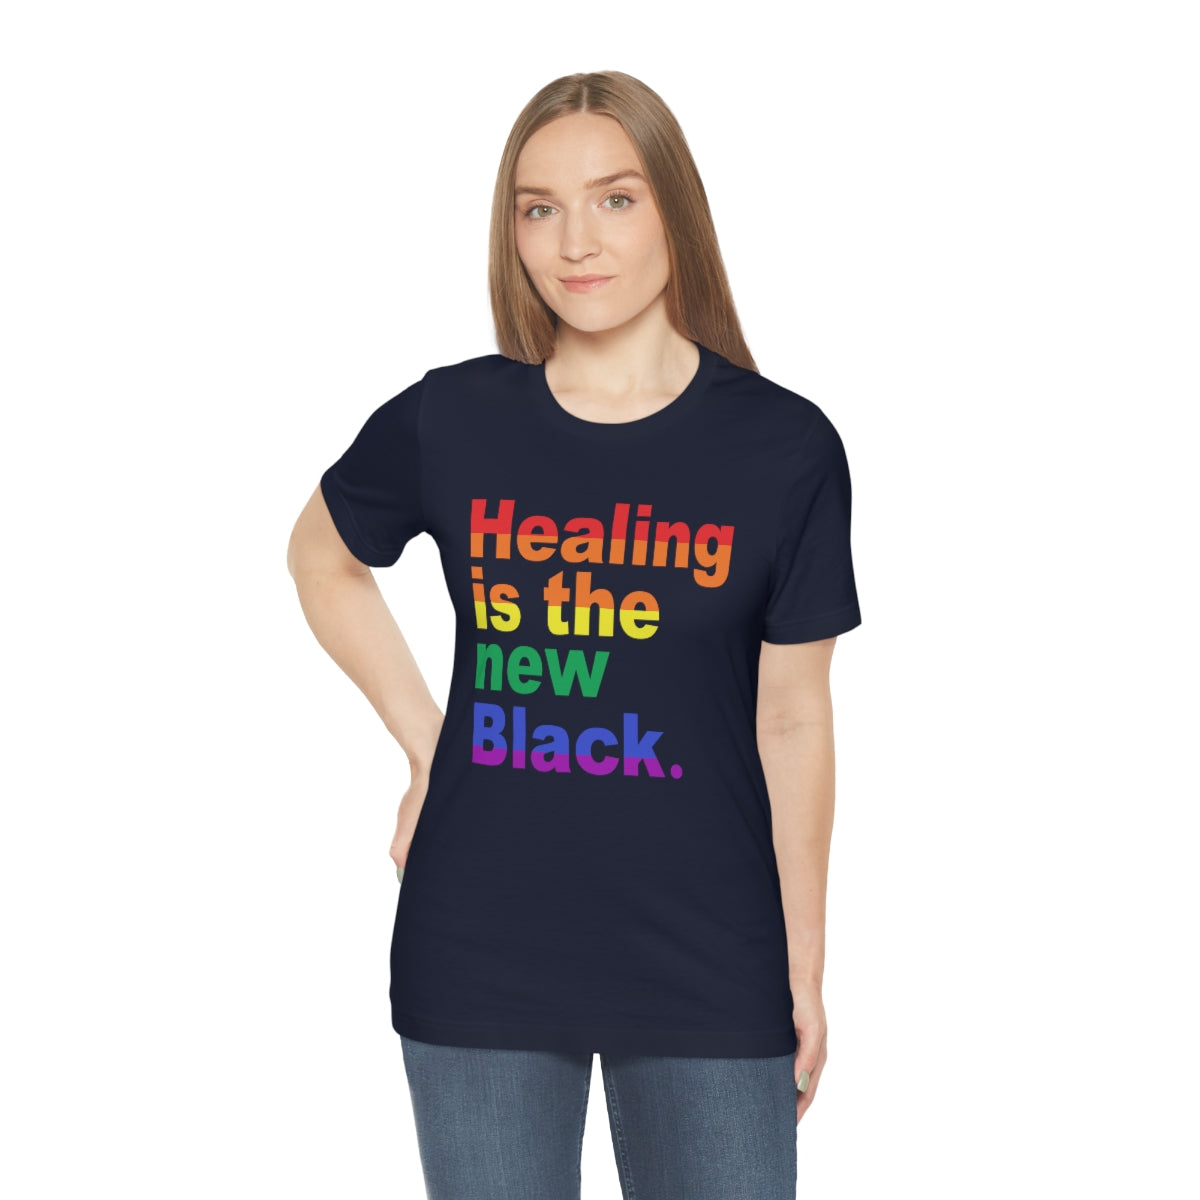 Copy of Copy of Copy of Healing is the New Black Tee